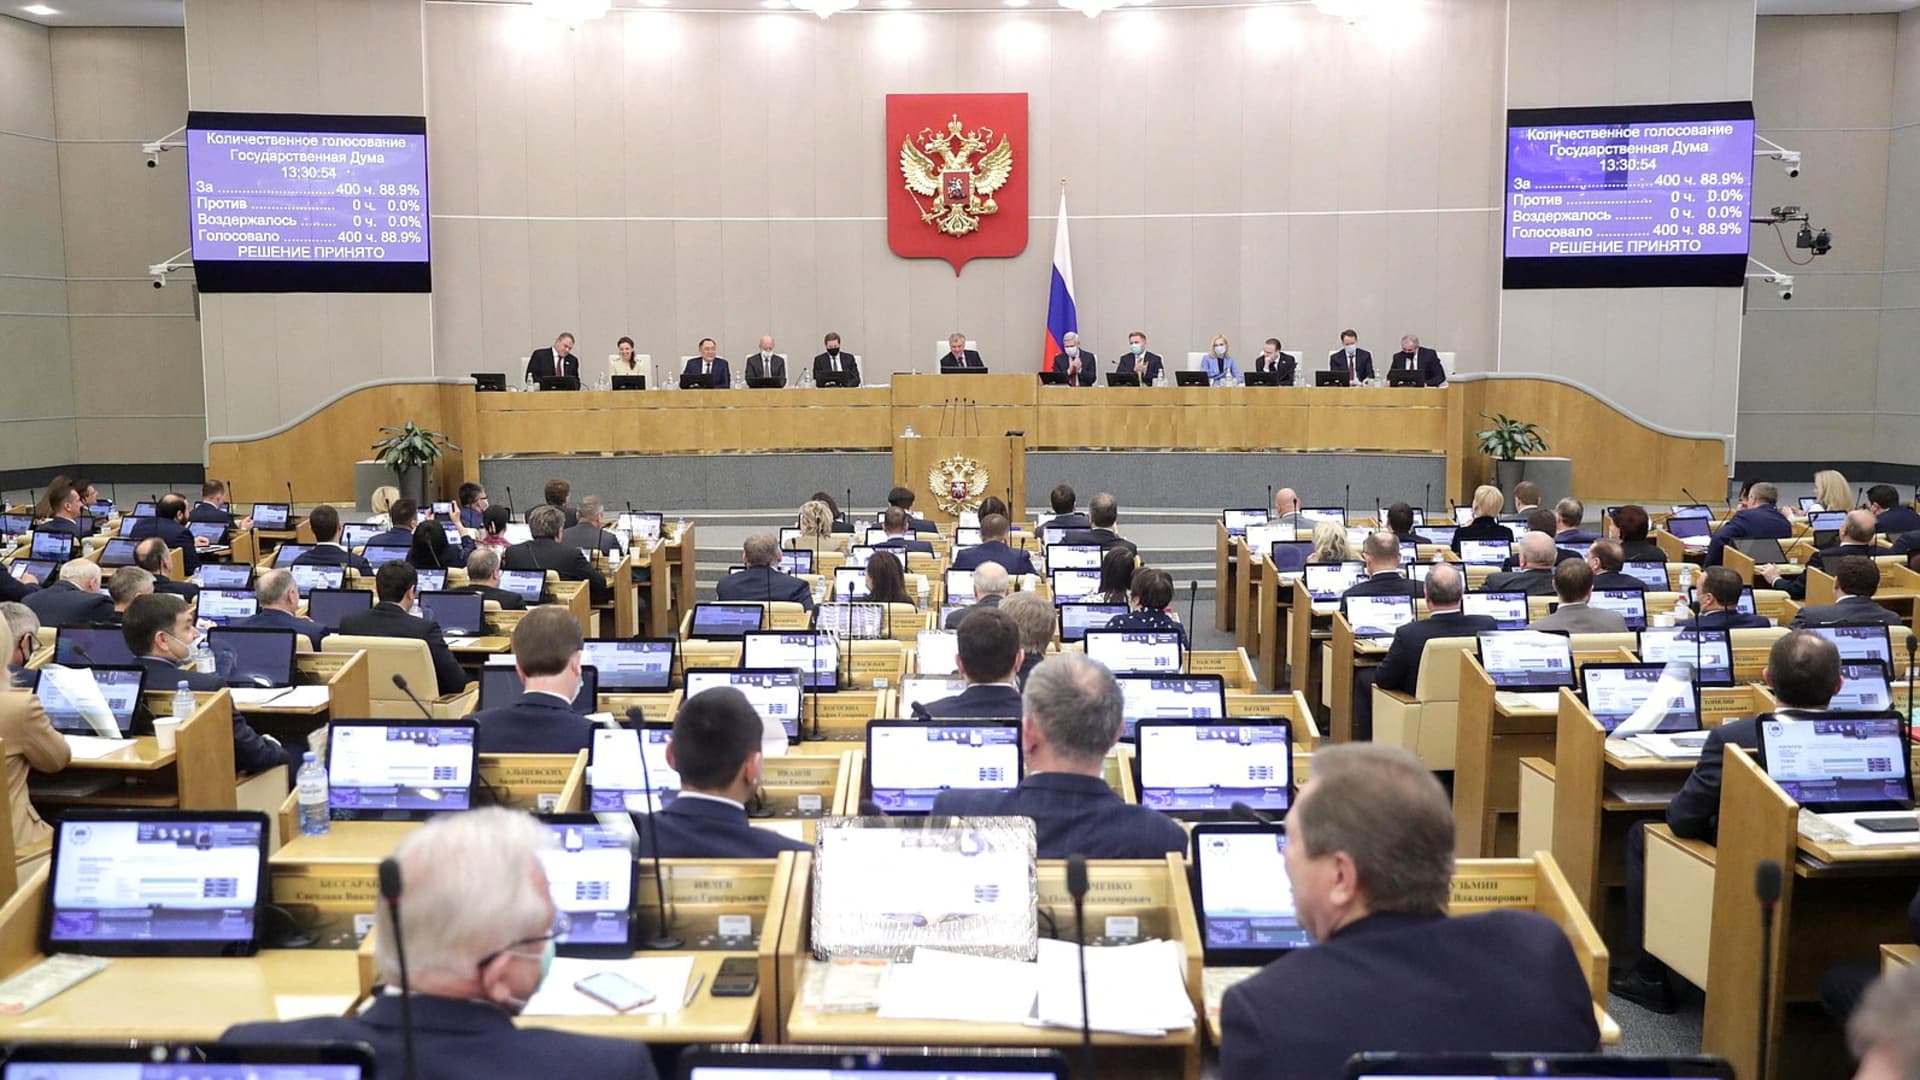 Russian lawmakers attend a session of the State Duma, the lower house of parliament, to consider approving friendship treaties with two self-proclaimed people's republics in eastern Ukraine, in Moscow, Russia February 22, 2022.